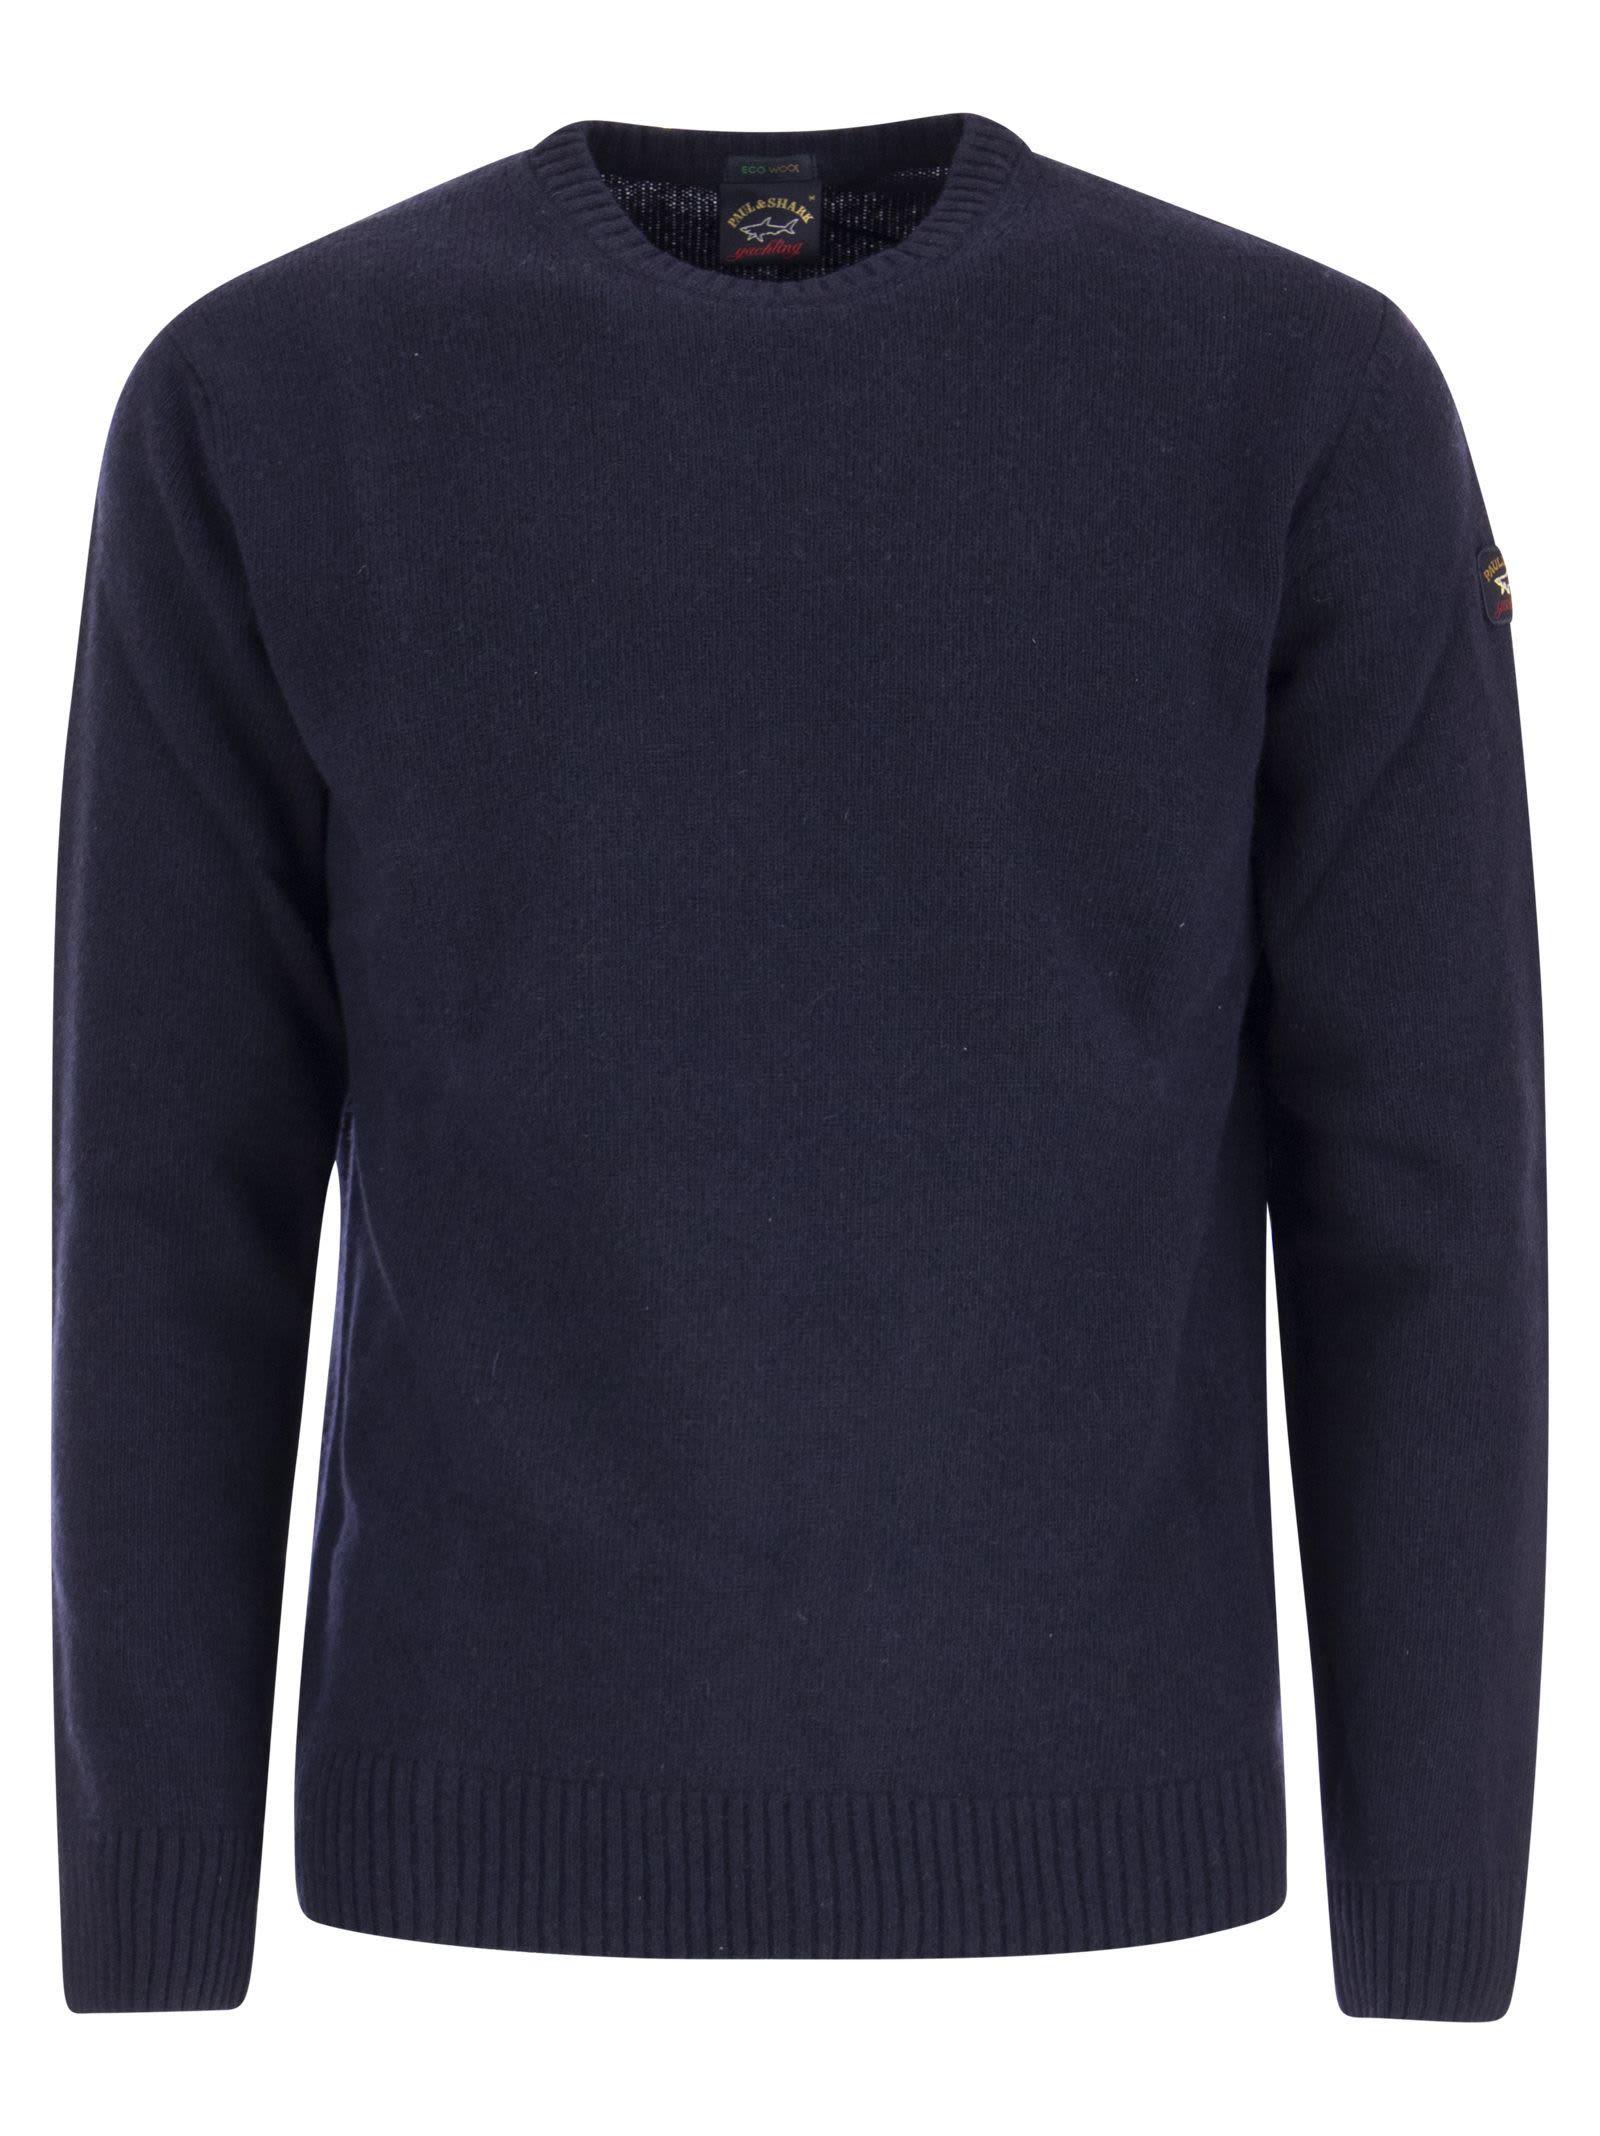 Wool Crew Neck With Arm Patch Sweater